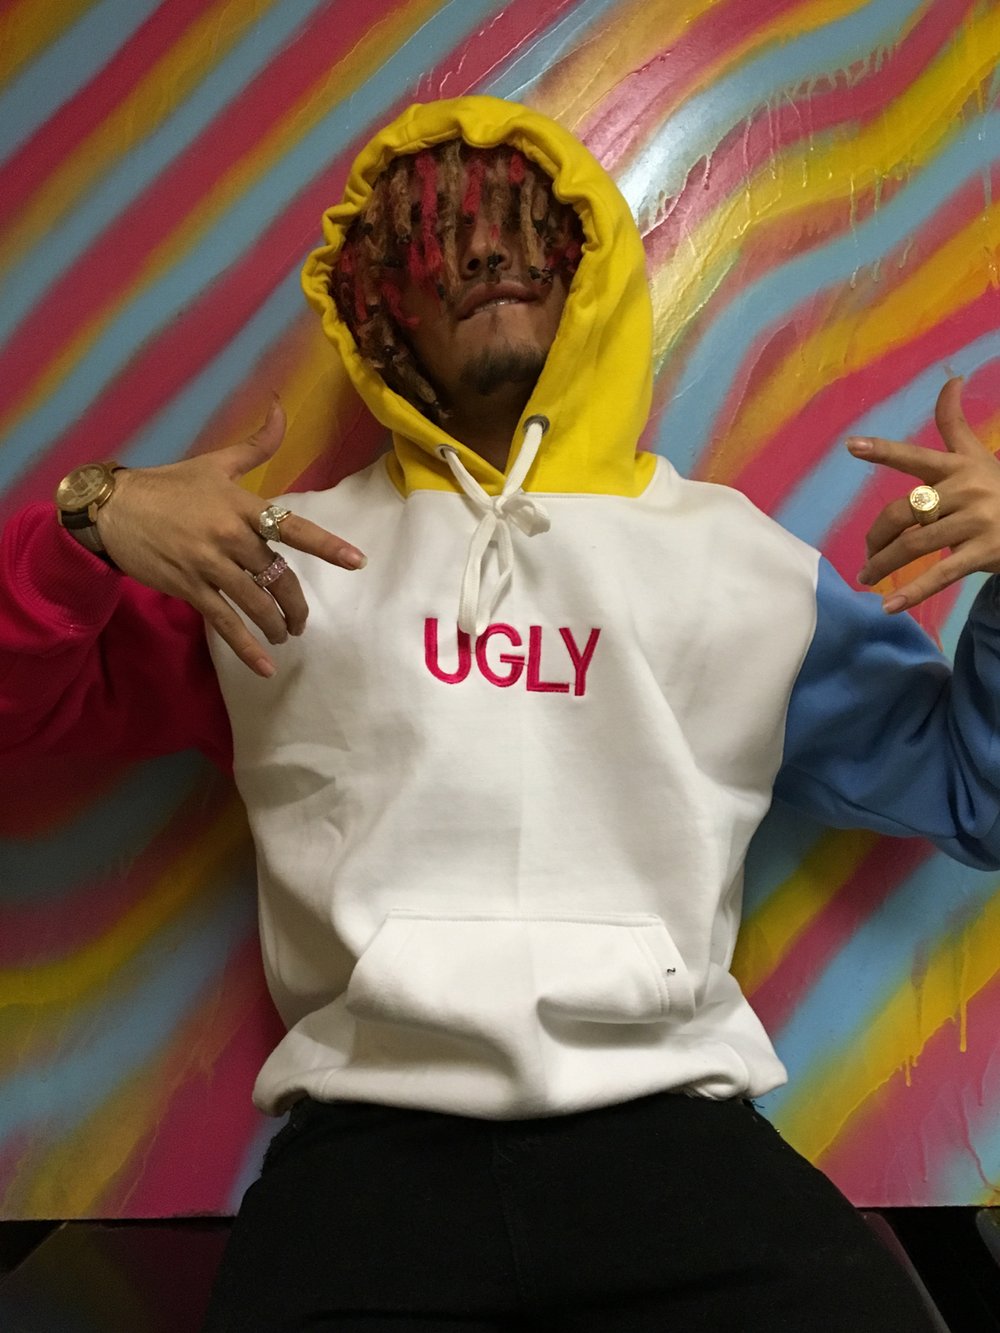 UGLY PINK BLUE AND YELLOW (ft. LIL PUMP)